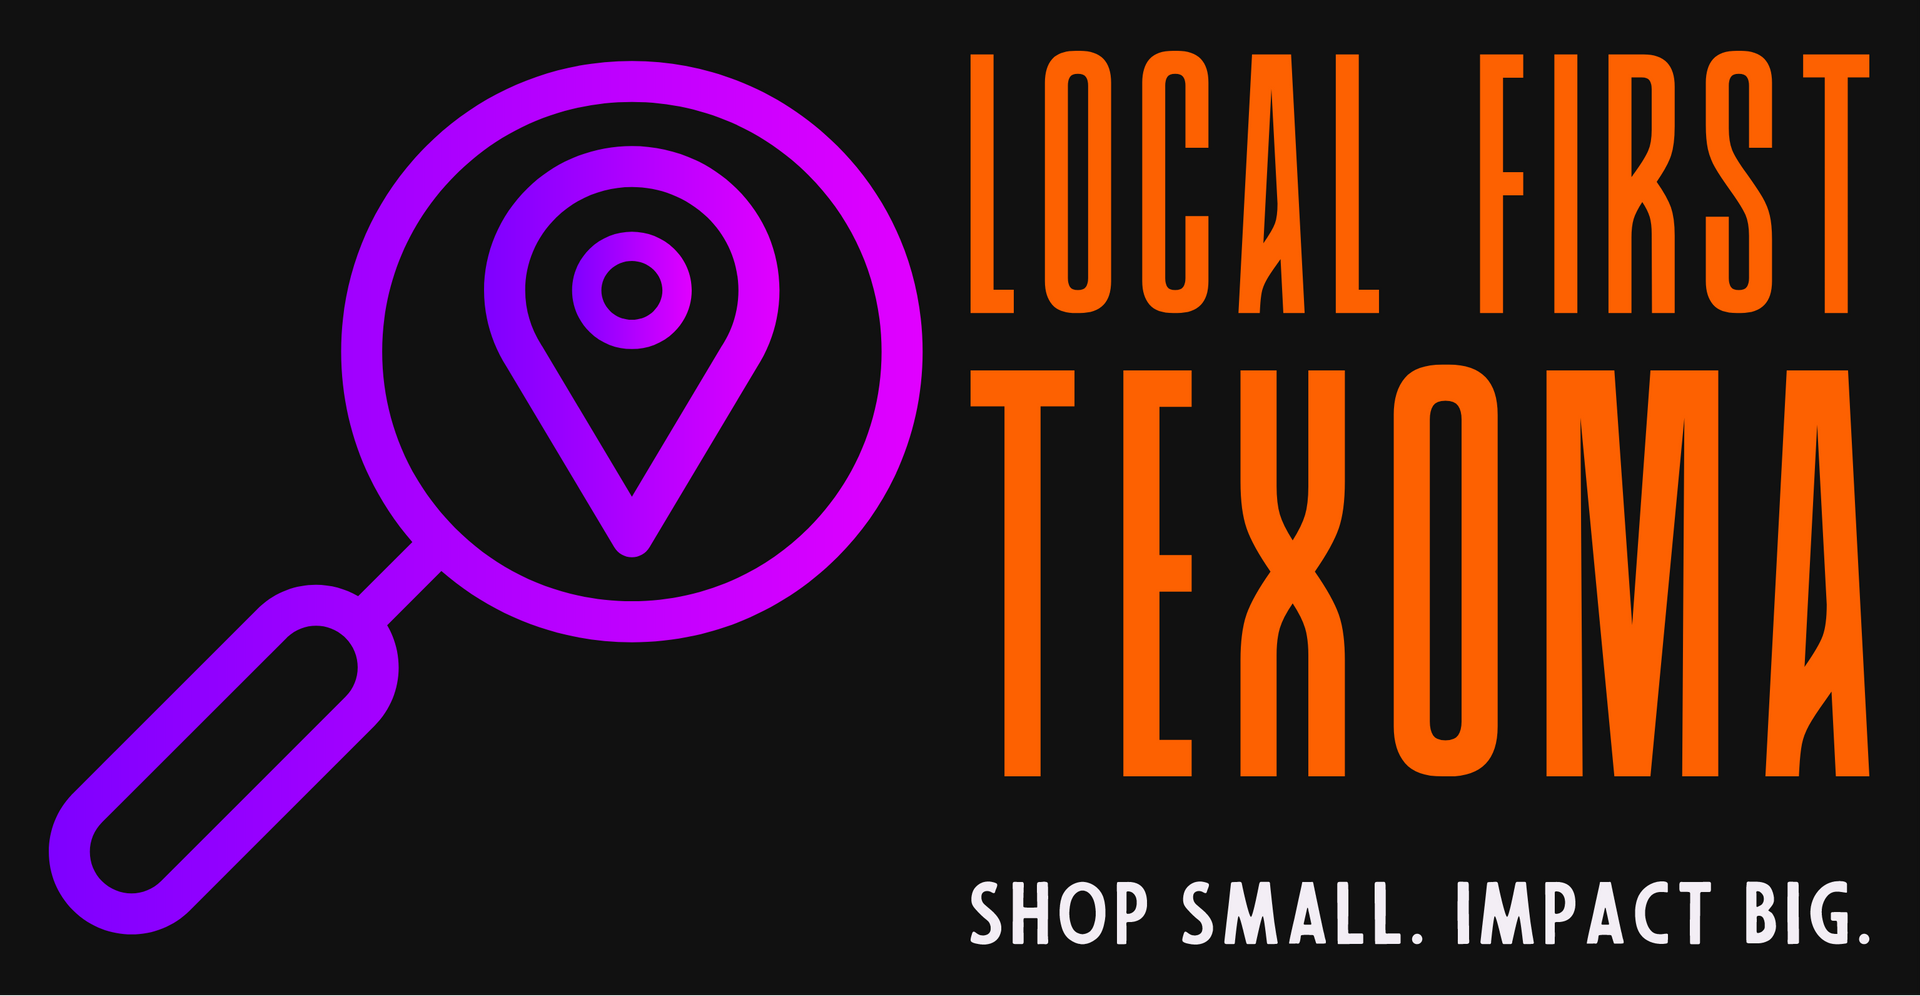 Shop & Search Local First